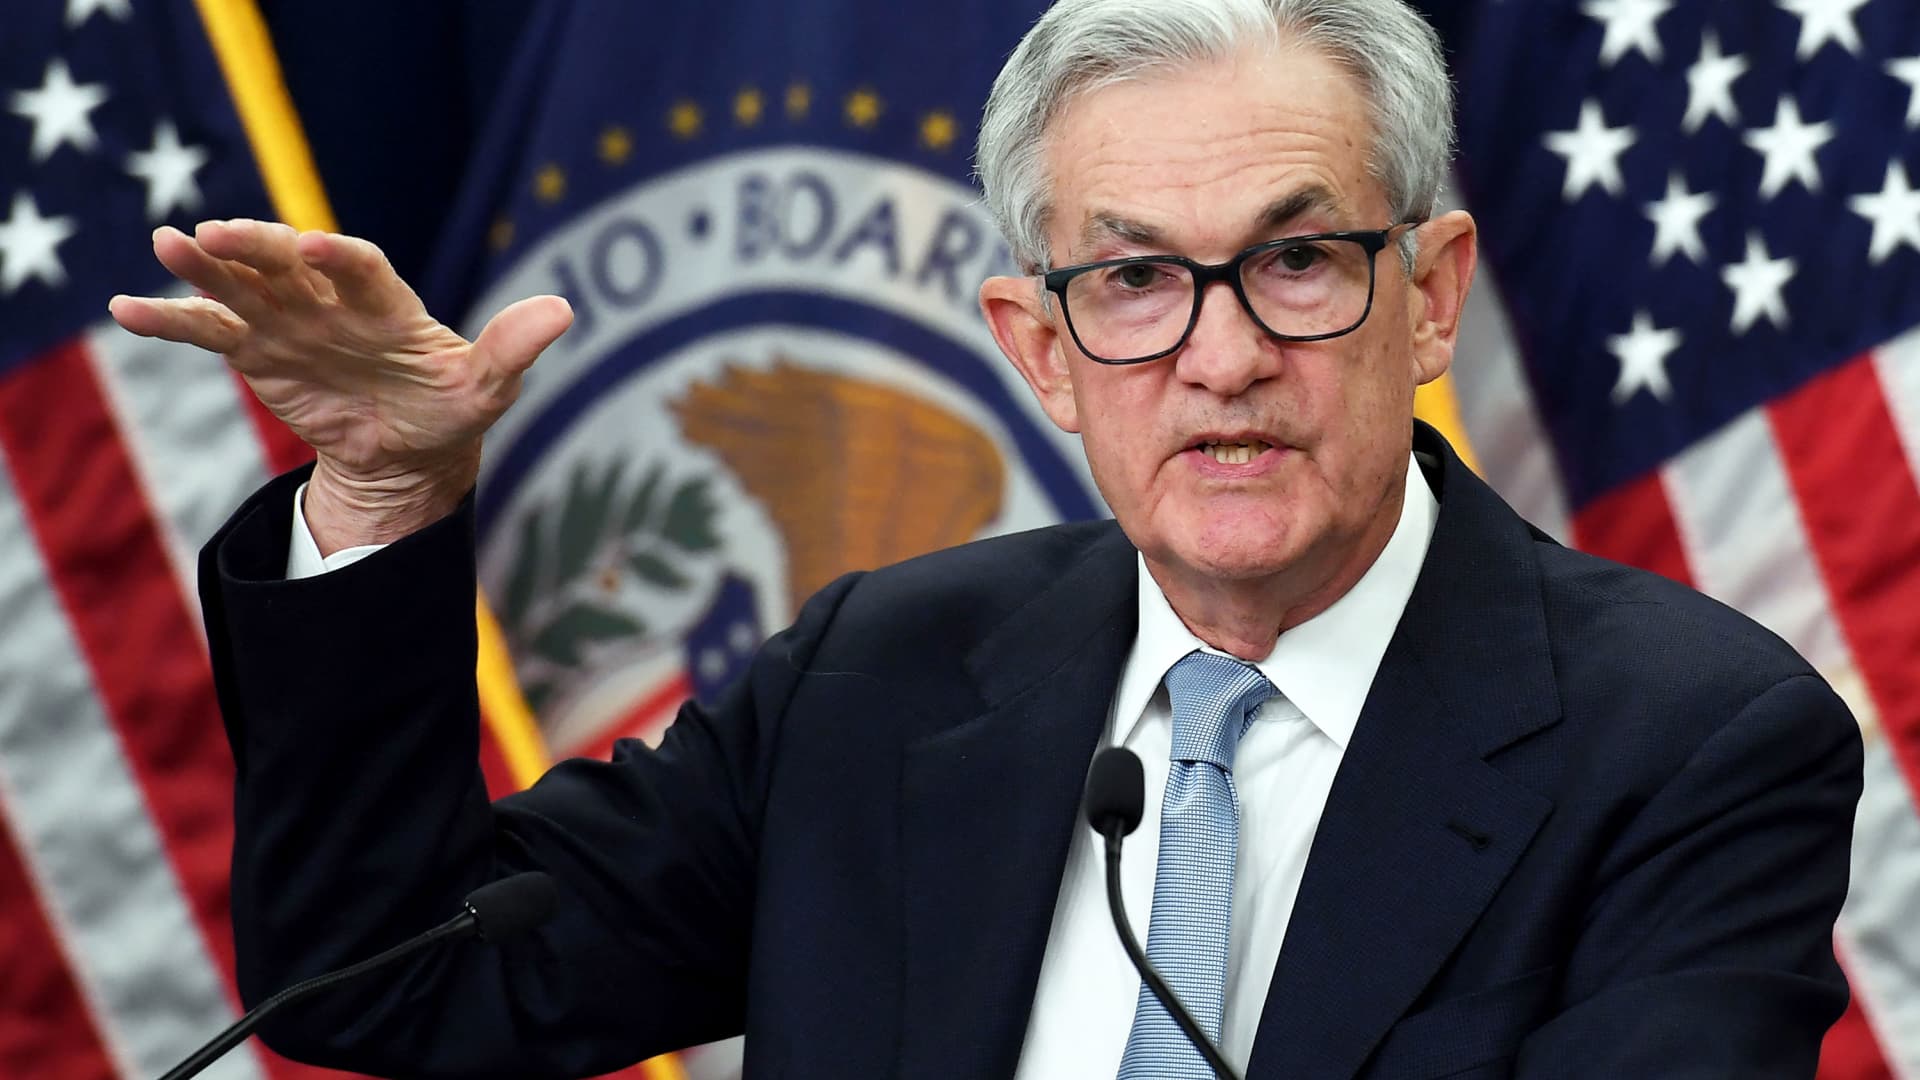 Financial conditions are tightening after the SVB collapse and could slow the economy, Powell says